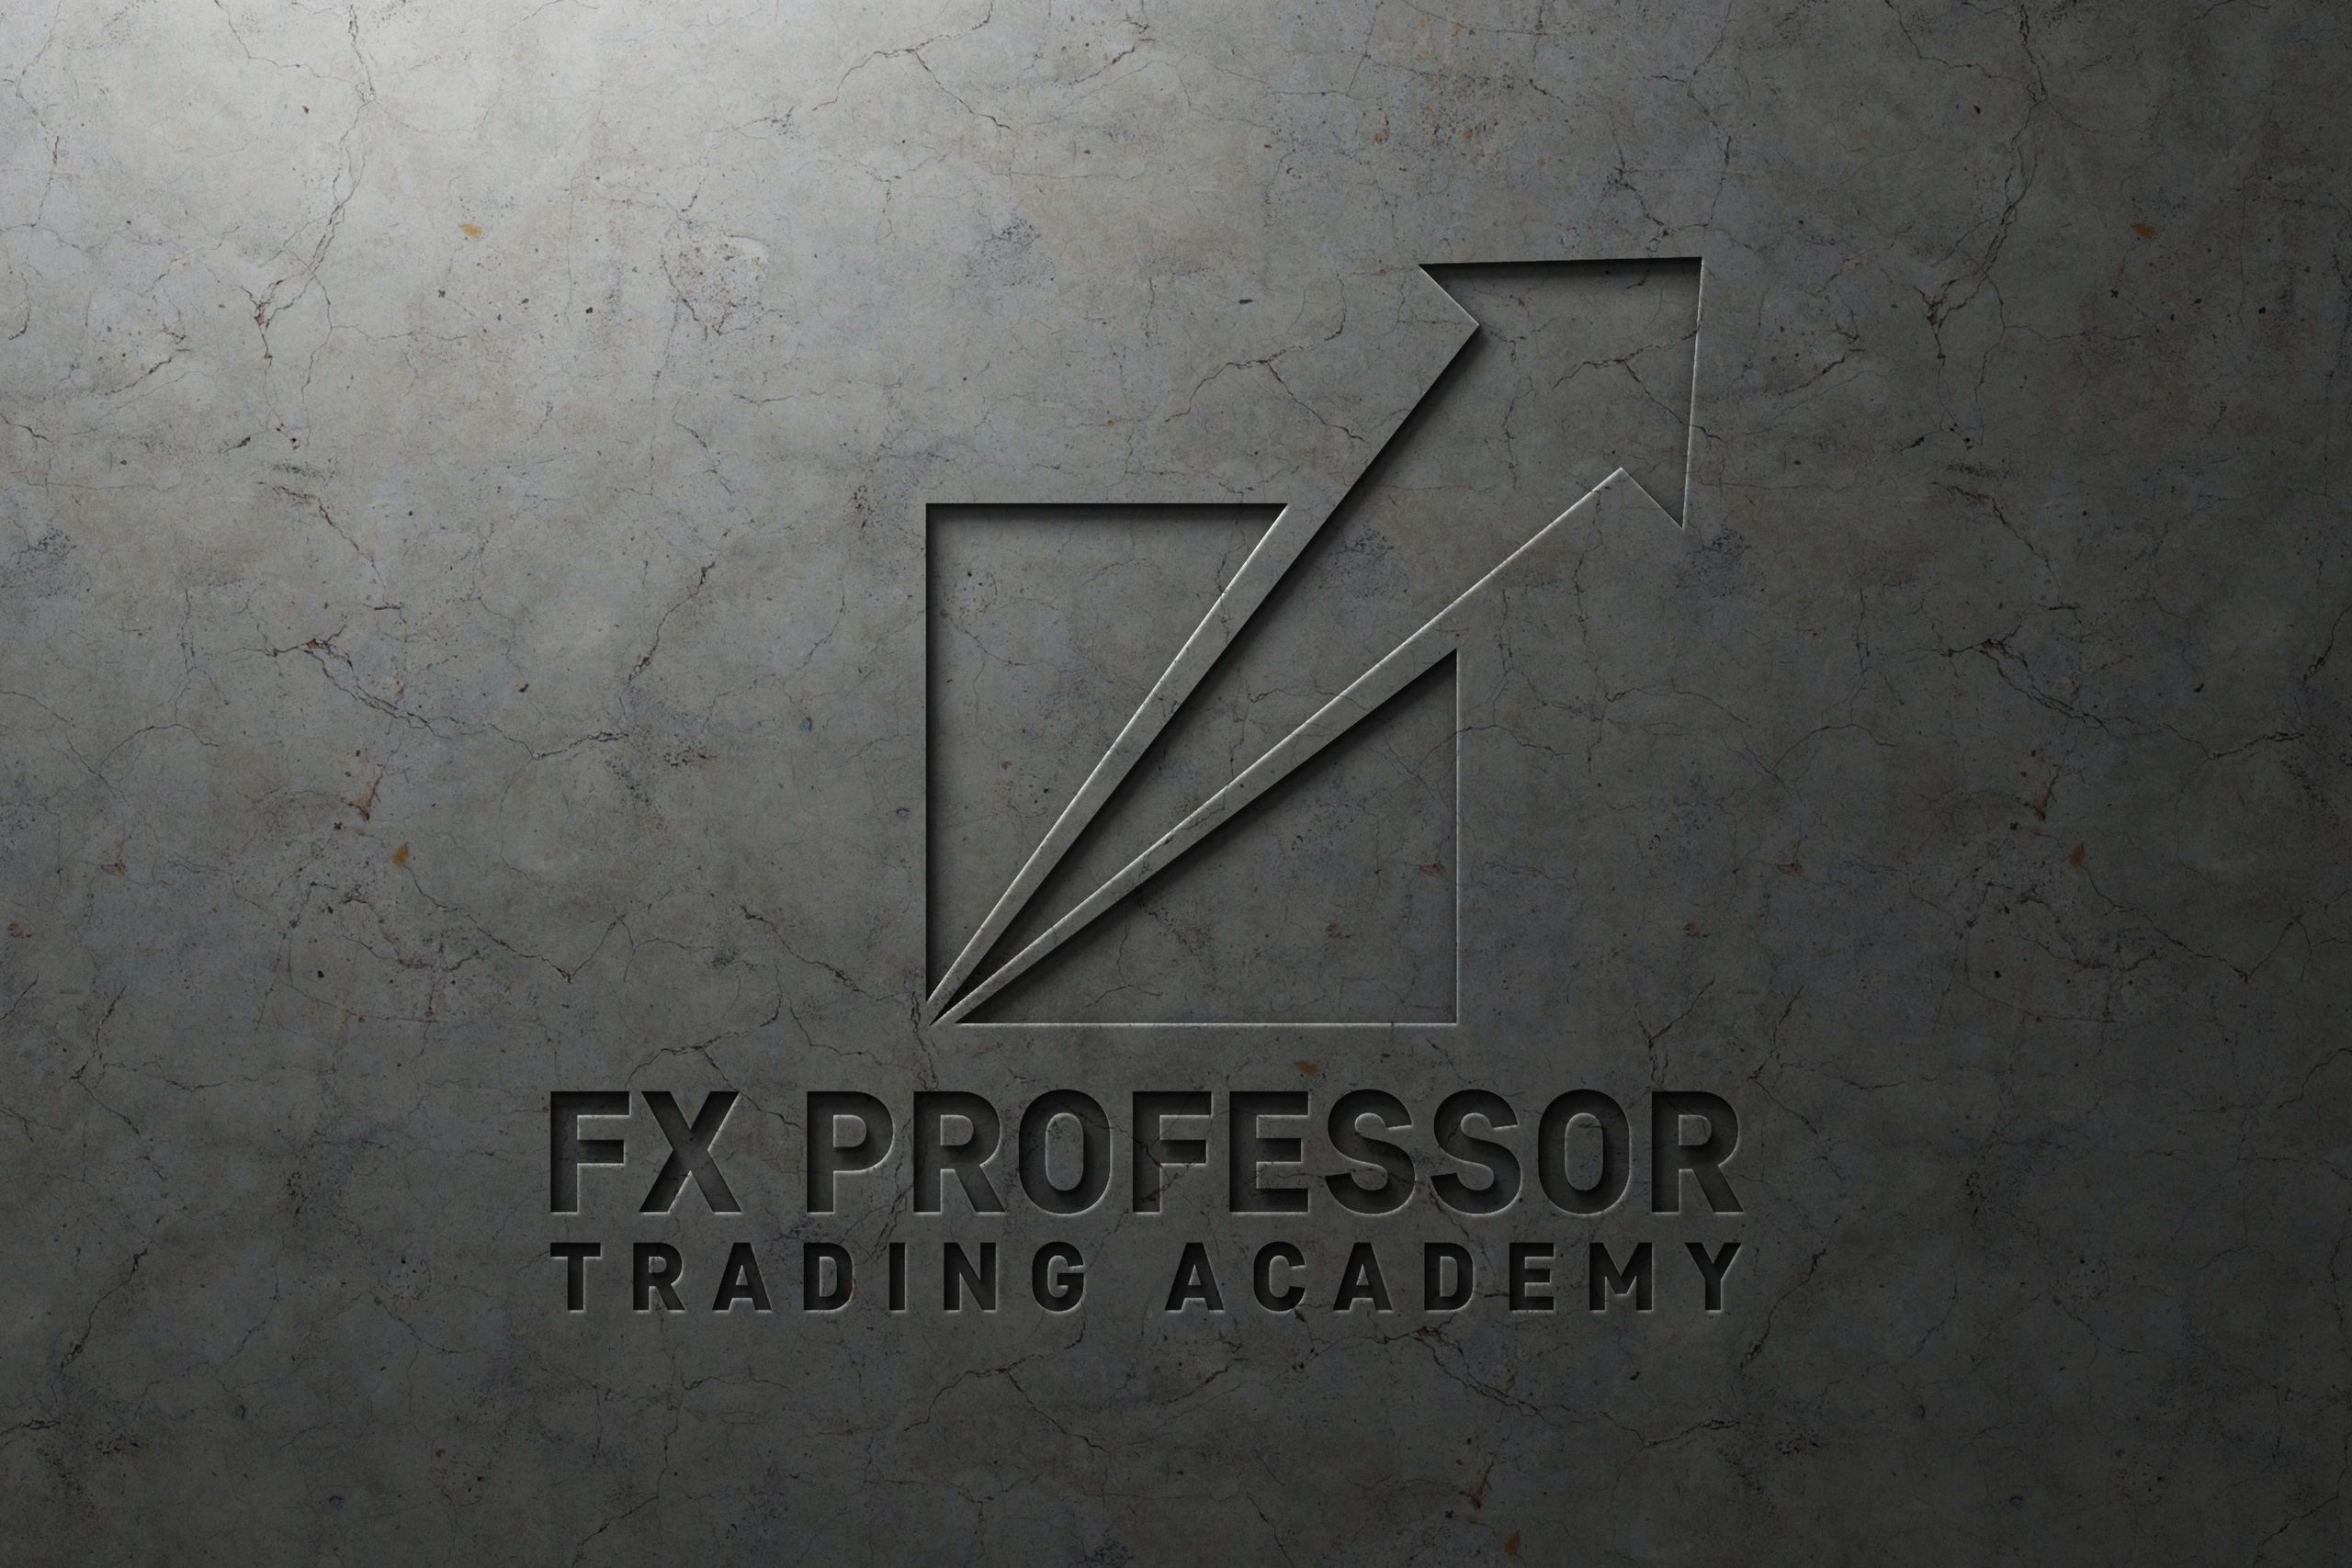 FXPROFESSOR the famous Trader offers some of the best Forex Trading signals and Trading education.
